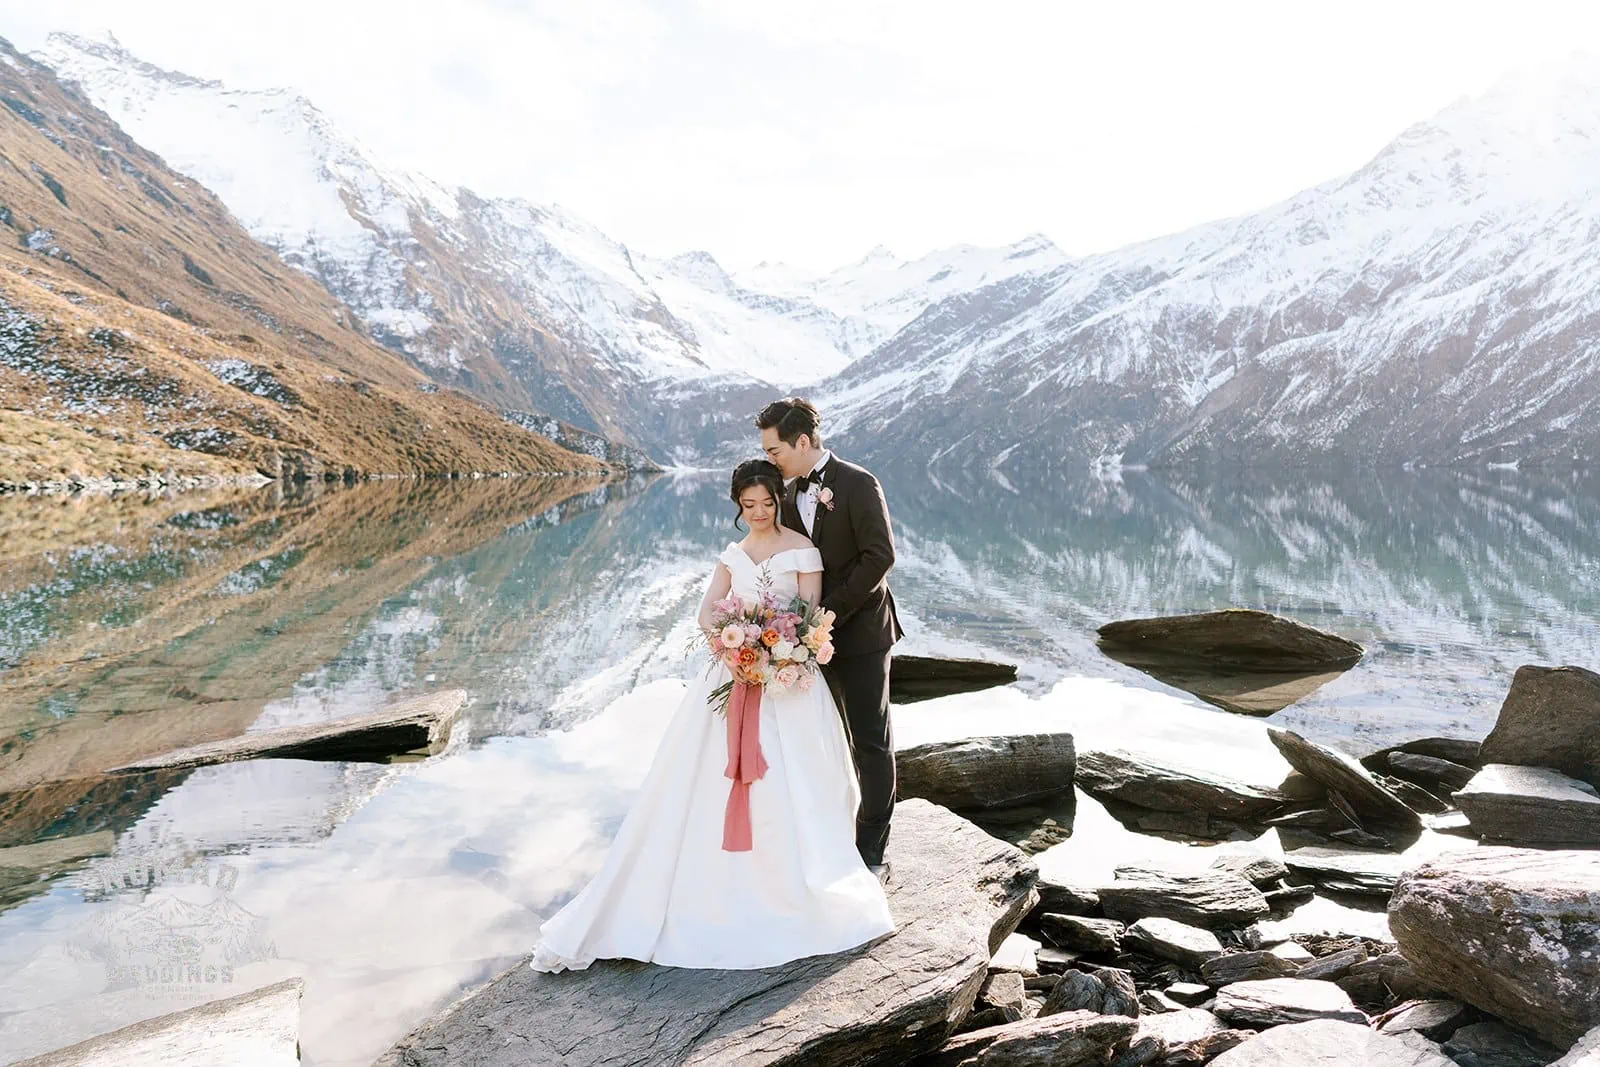 Queenstown New Zealand Elopement Wedding Photographer - Bo and Junyi's Heli Pre Wedding Shoot featuring a lake and mountains in the background.